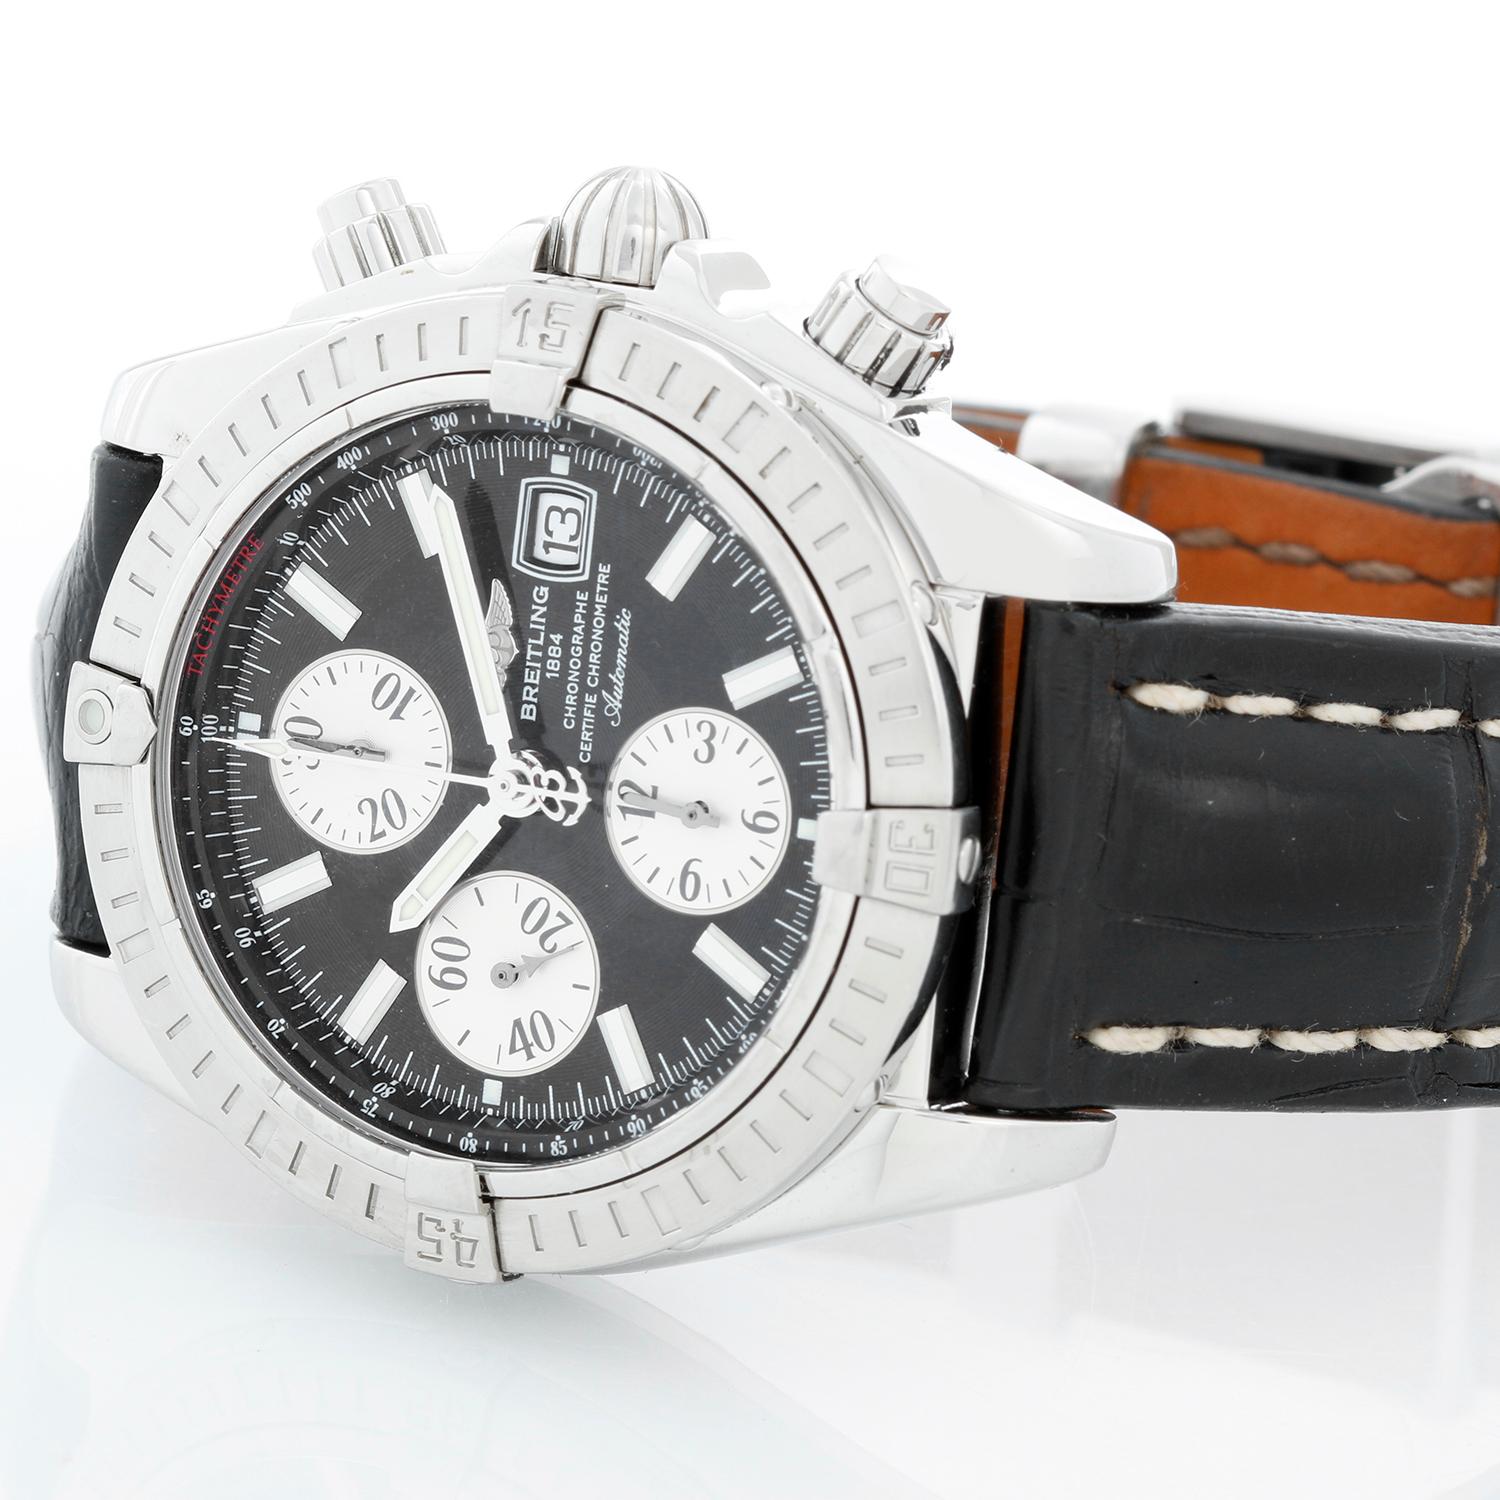 Breitling Chronomat Evolution Men's Watch A1335611 - Automatic winding chronograph. Stainless steel case with steel bezel (42 mm). Black dial with polished hour markers. Black alligator with Breitling deployant clasp. Pre-owned with Breitling box